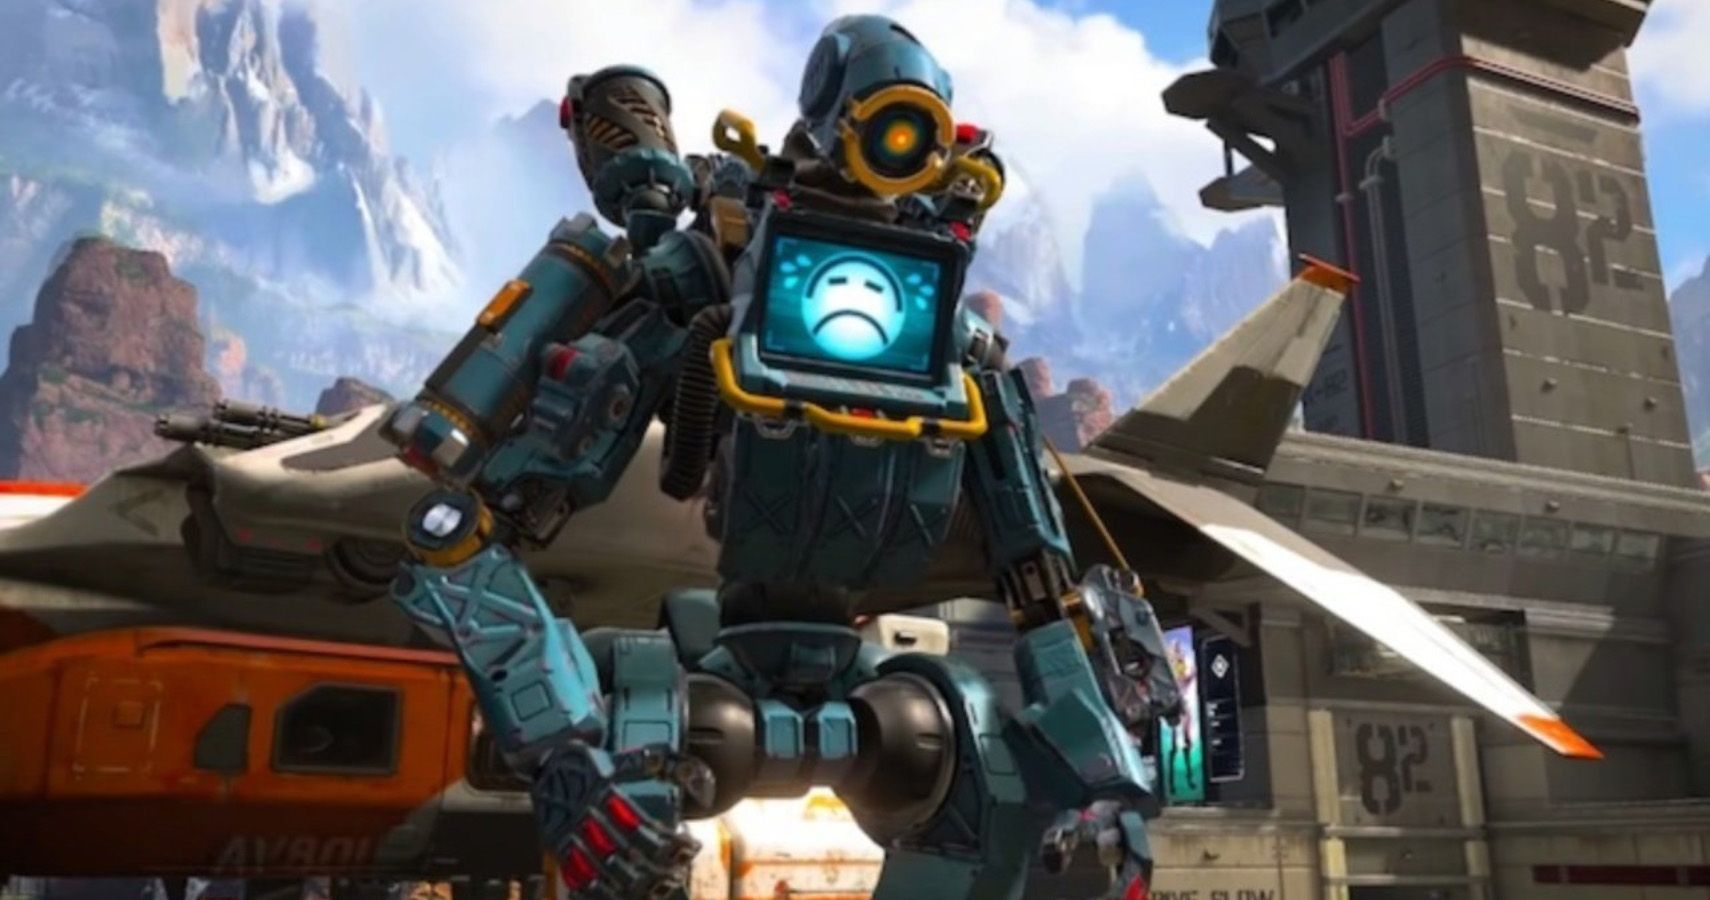 10 Things Teased About Apex Legends Season 1